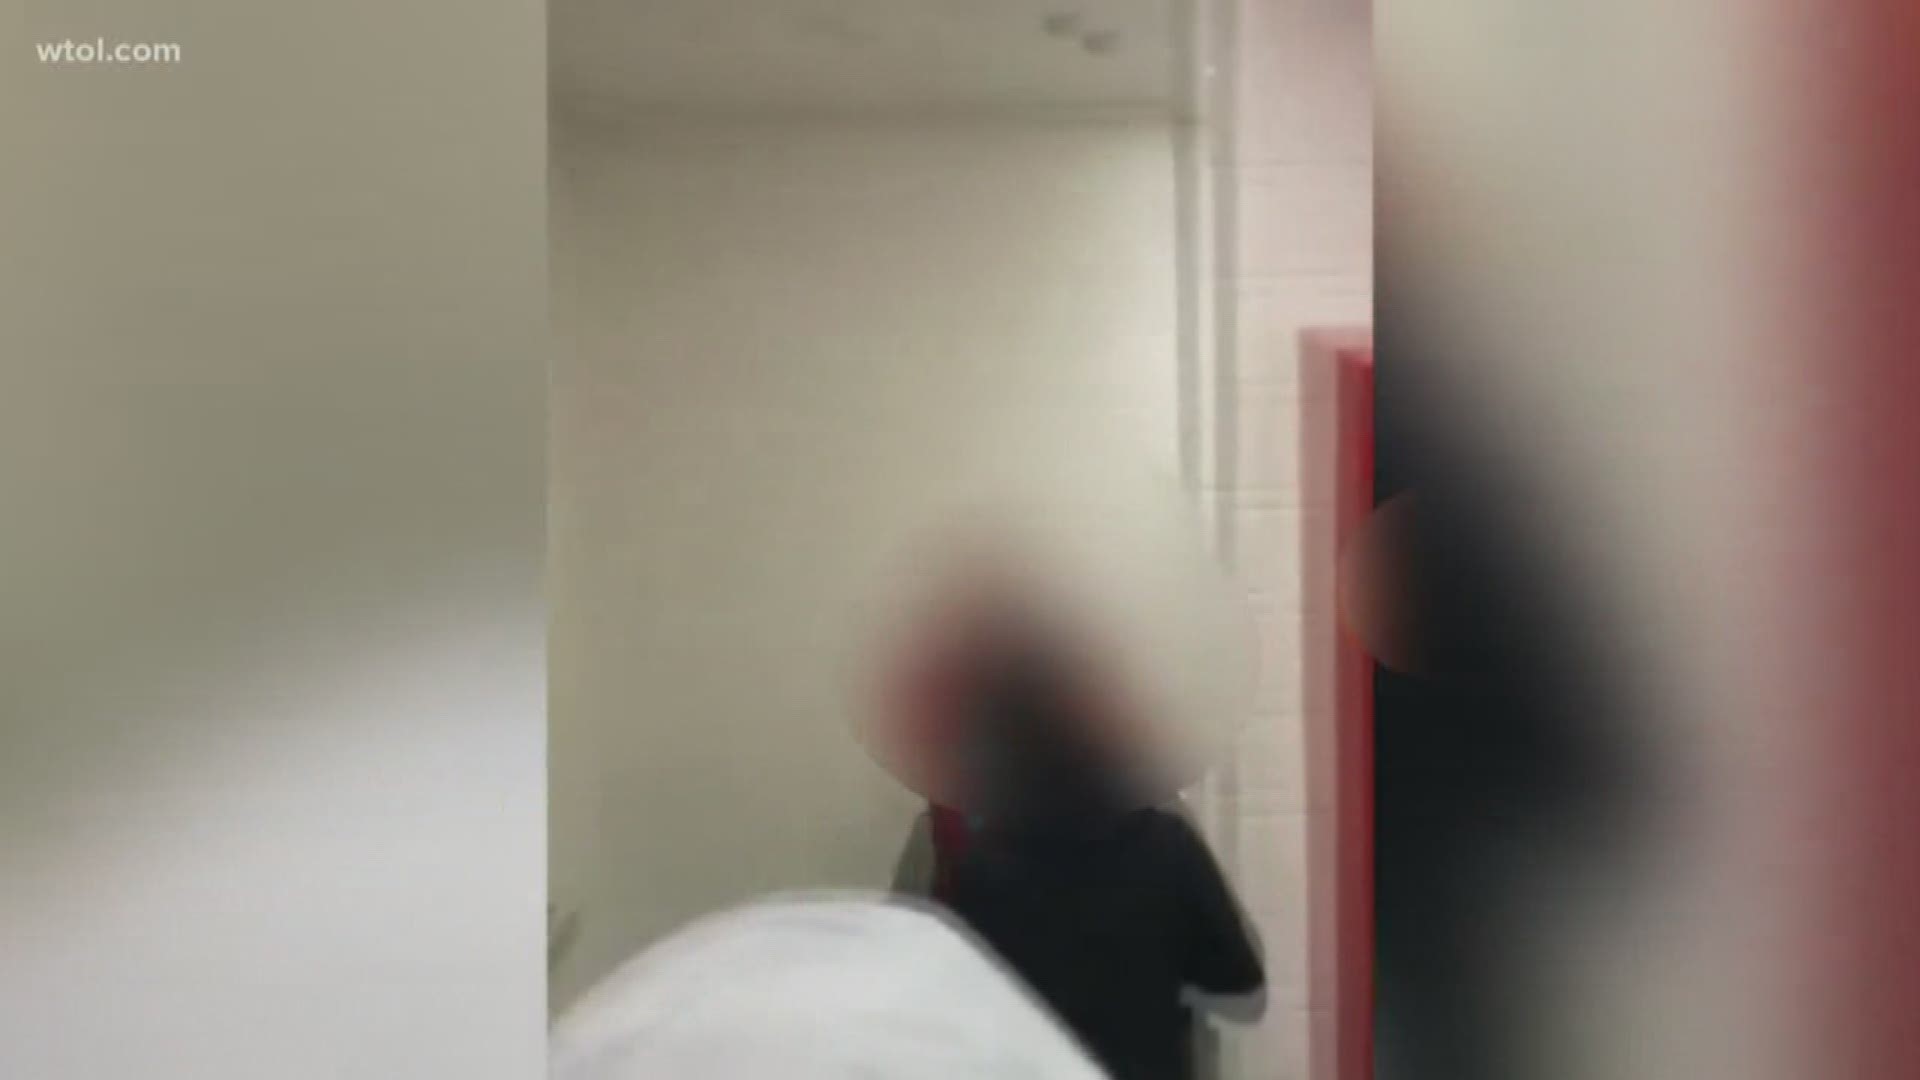 The video shows one student punching another in a locker video. School officials said they are taking disciplinary measures against the aggressor.